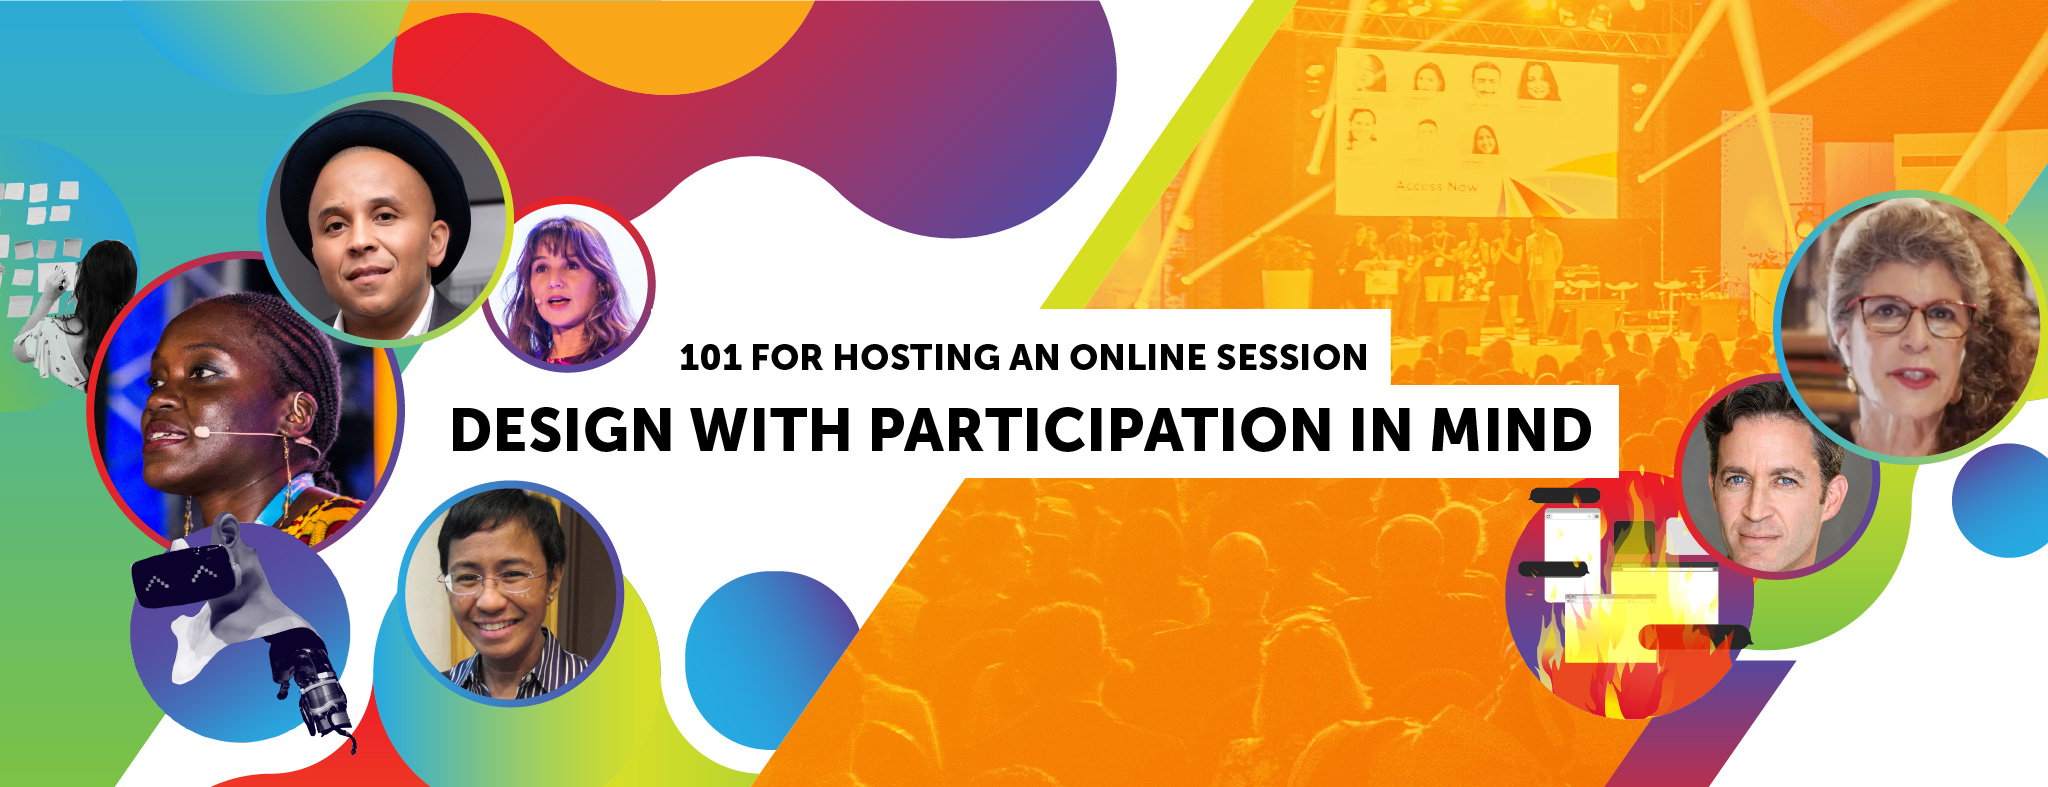 101 for hosting an online session: design with participation in mind